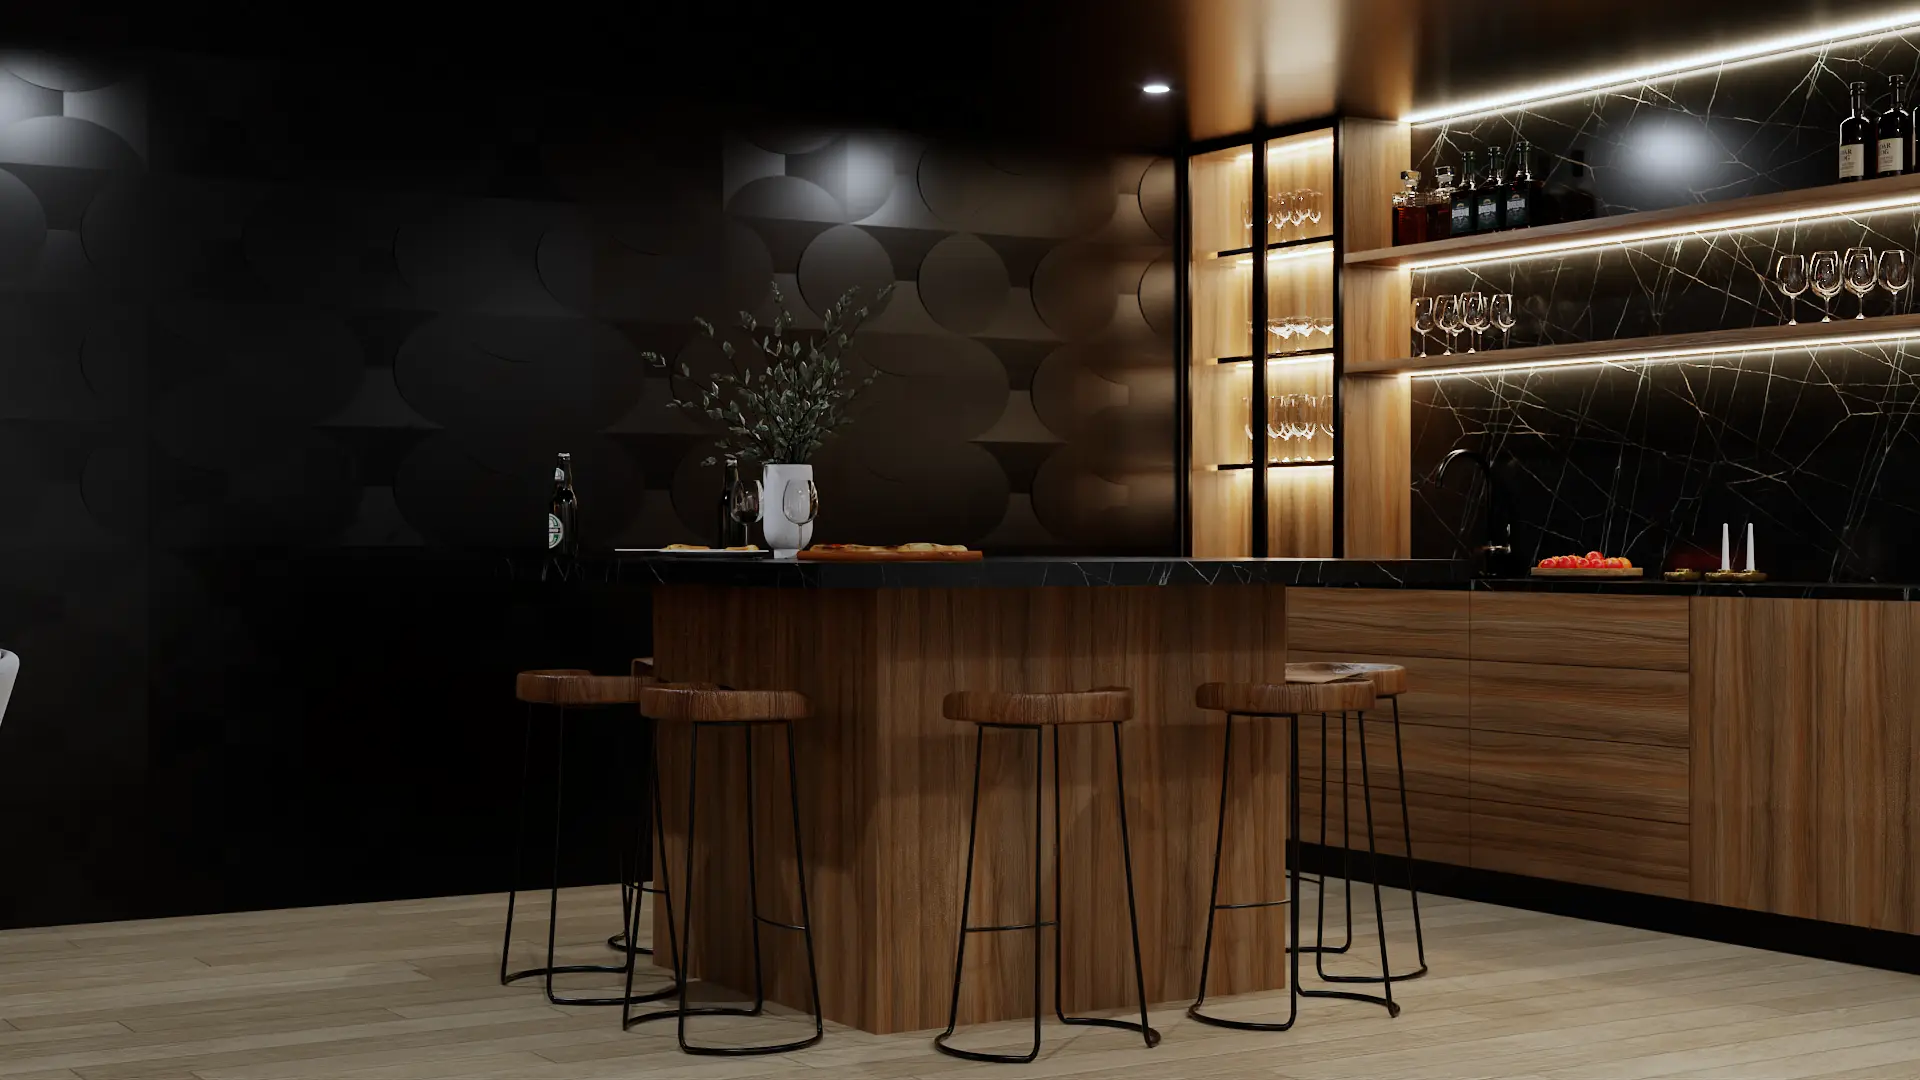 A modern home bar with wooden cabinetry, a black countertop, ambient lighting, and elegant bar stools. The stylish design makes it a perfect space for social gatherings. Design by Debora, an online interior design service.